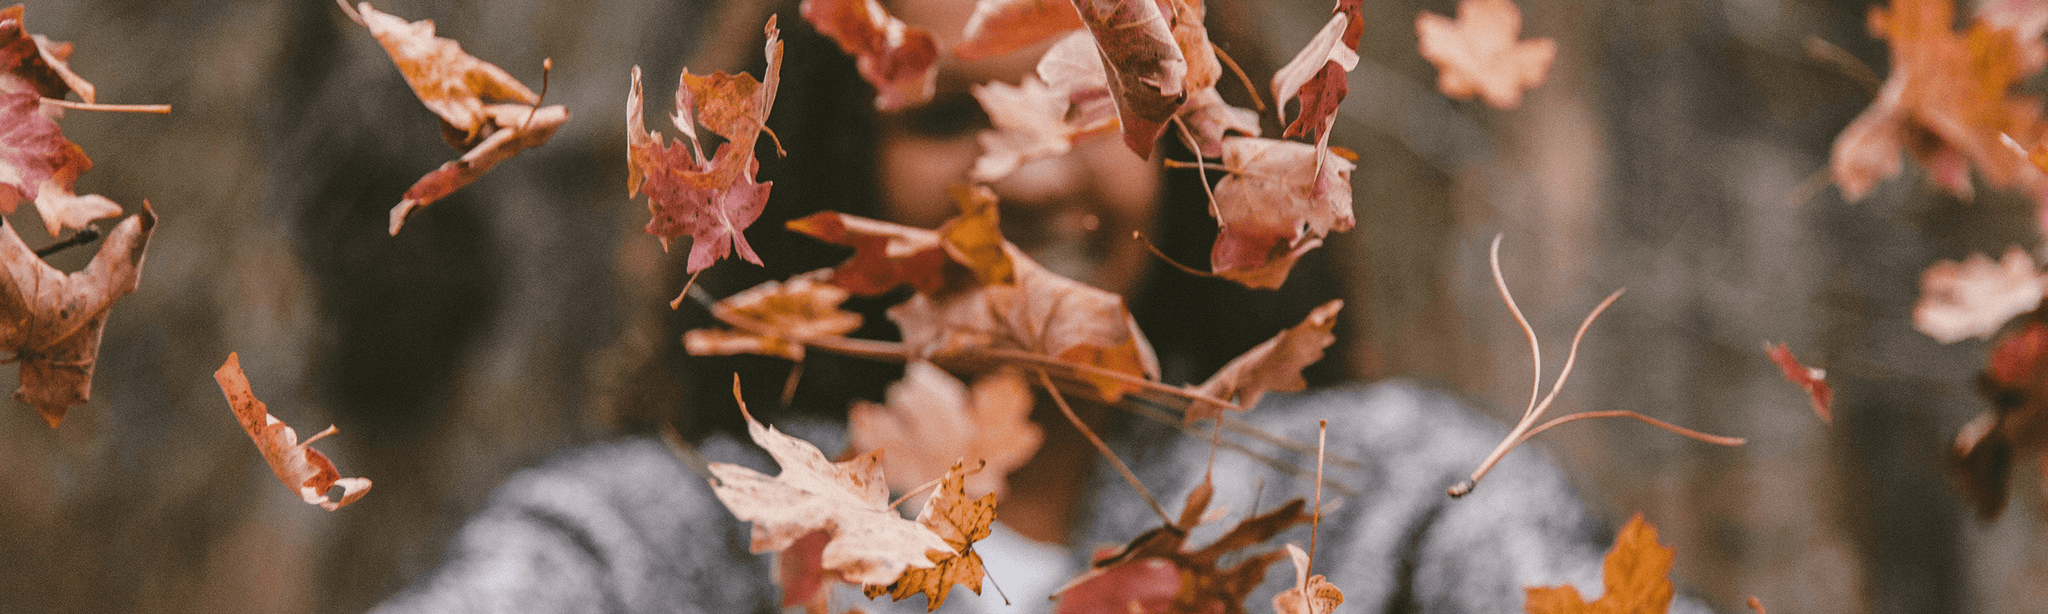 Autumnal equinox: 9 Tips to support your health this season